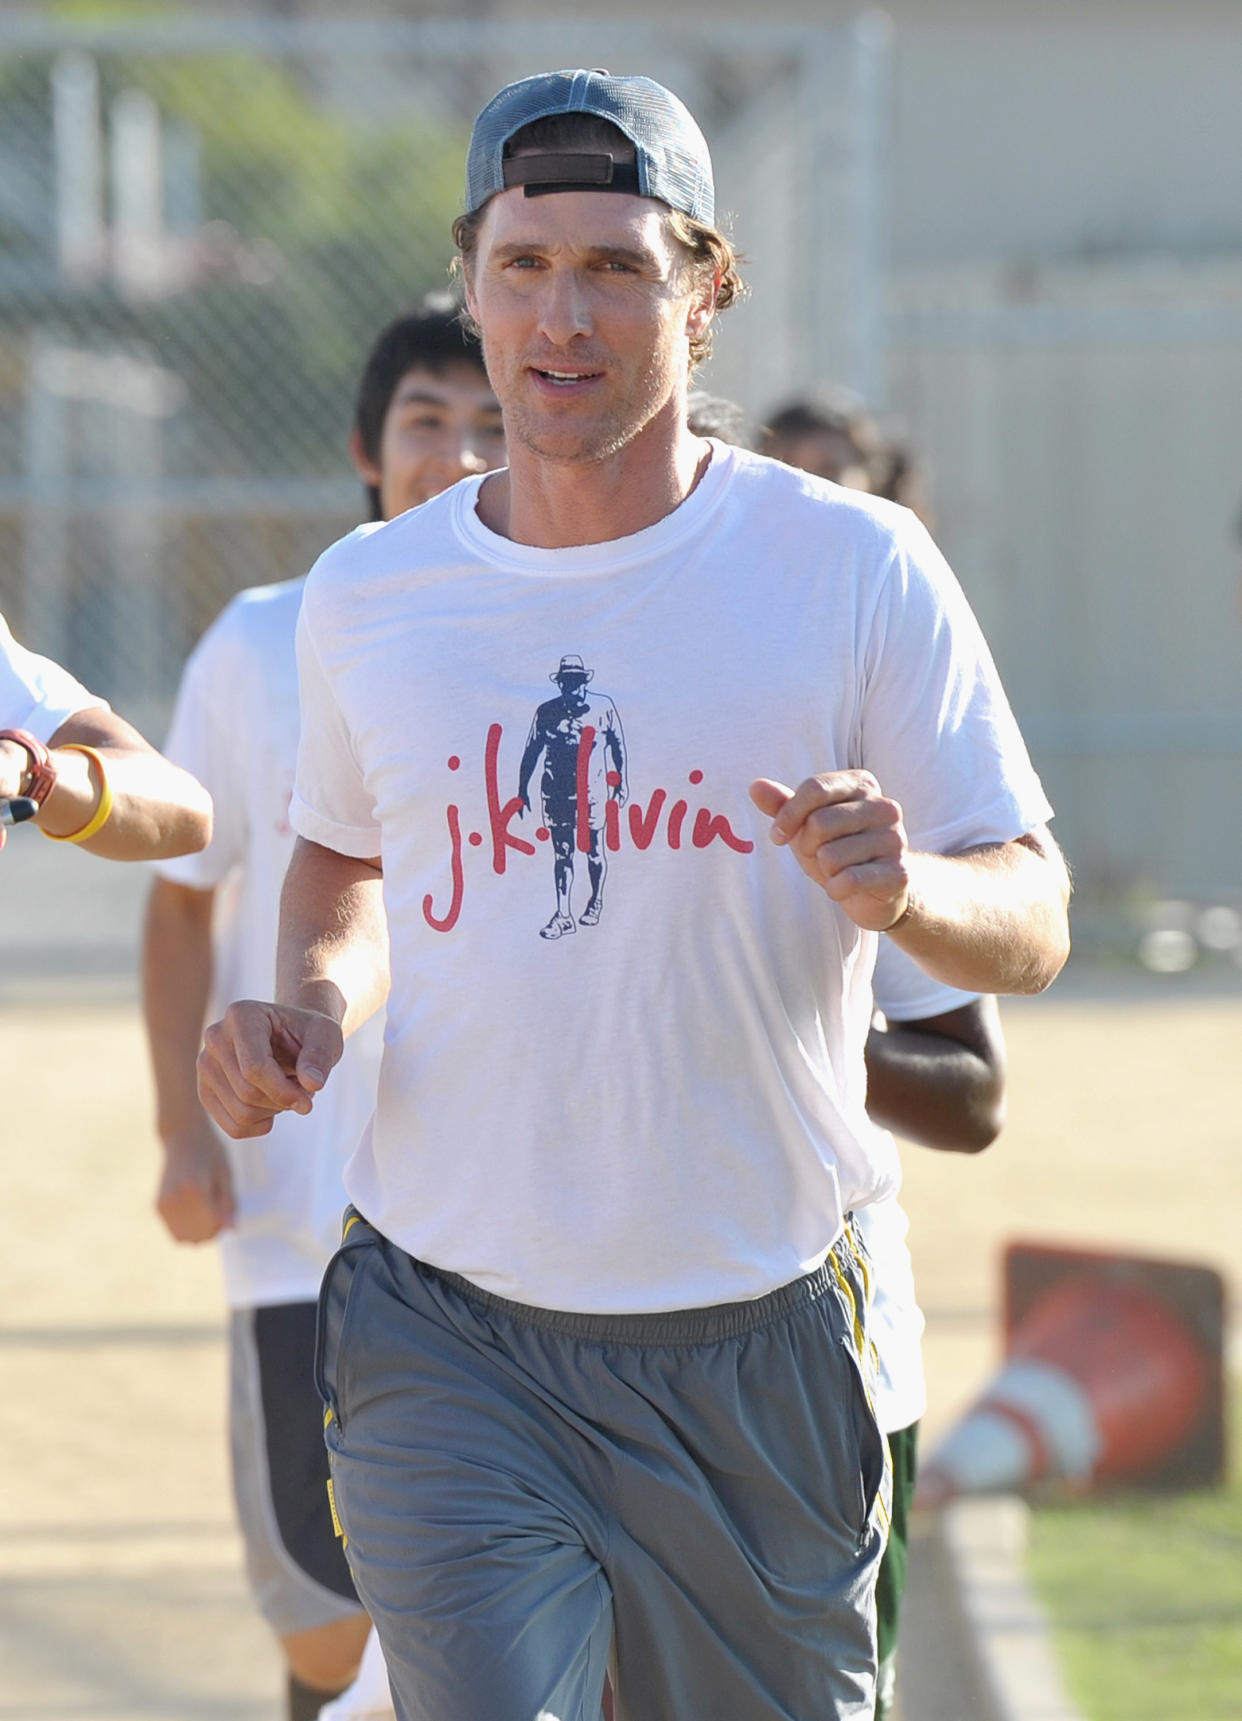 LOS ANGELES, CA - OCTOBER 13:  Matthew McConaughey and Camila Alves' j.k. livin foundation was joined today by partners from Samsung and Best Buy to encourage kids to lead active lives and make healthy choices at a Los Angeles high school.  New Samsung technology was installed throughout the school by Best Buy's Geek Squad.  (Photo by John Shearer/WireImage)